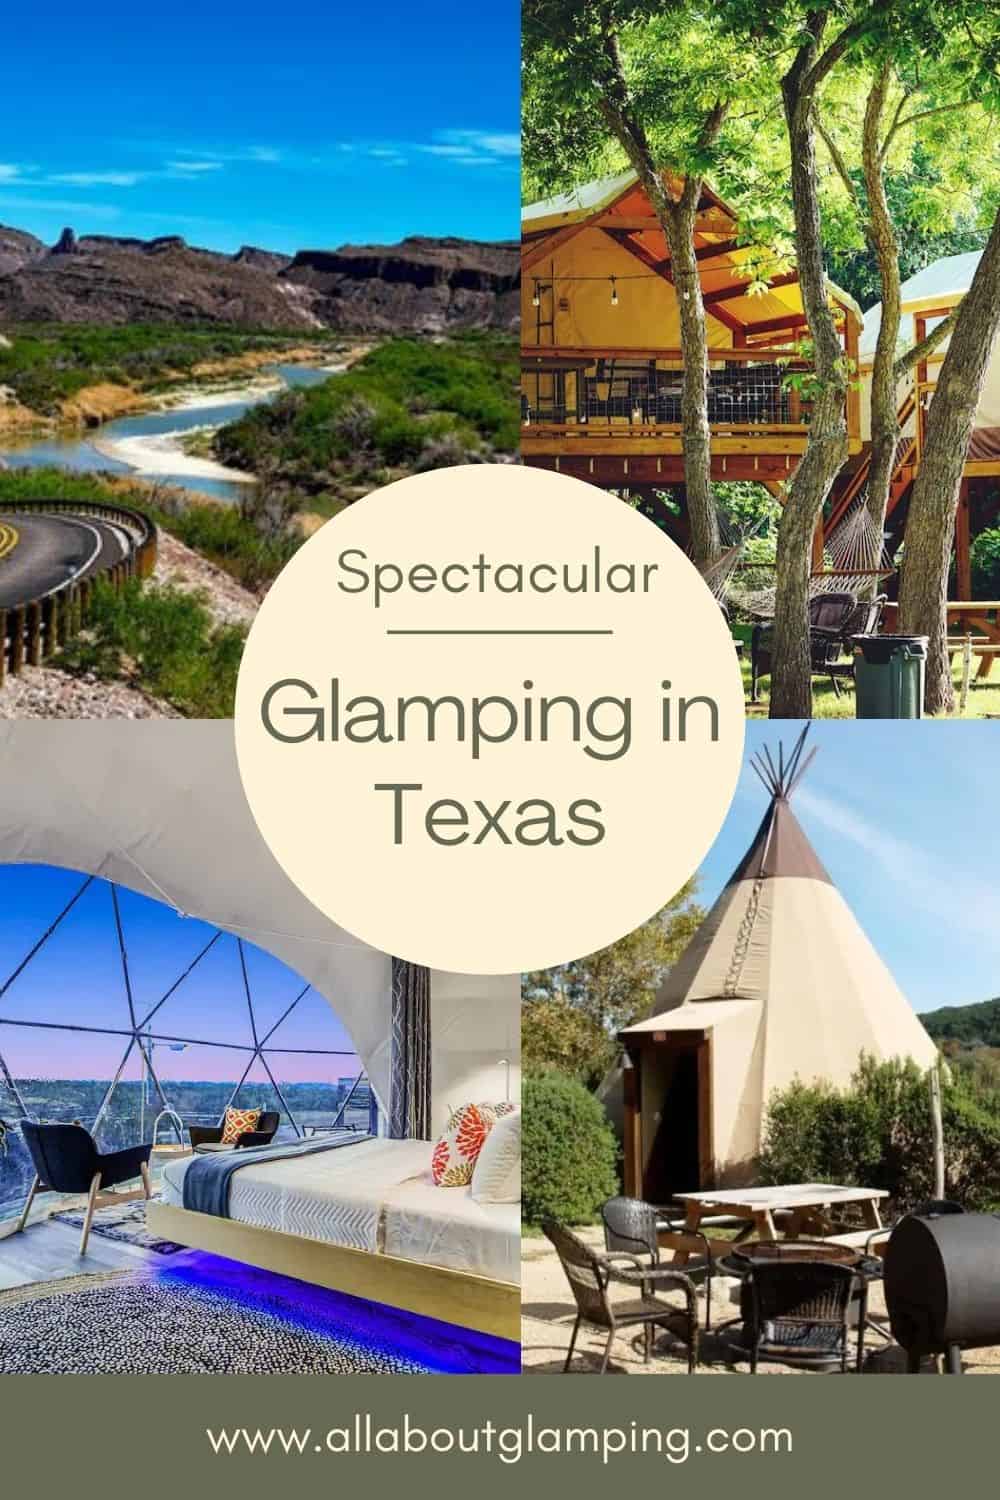 The hardest part of planning a Glamping in Texas getaway is deciding which of the amazing Texas Glamping Spots to book.